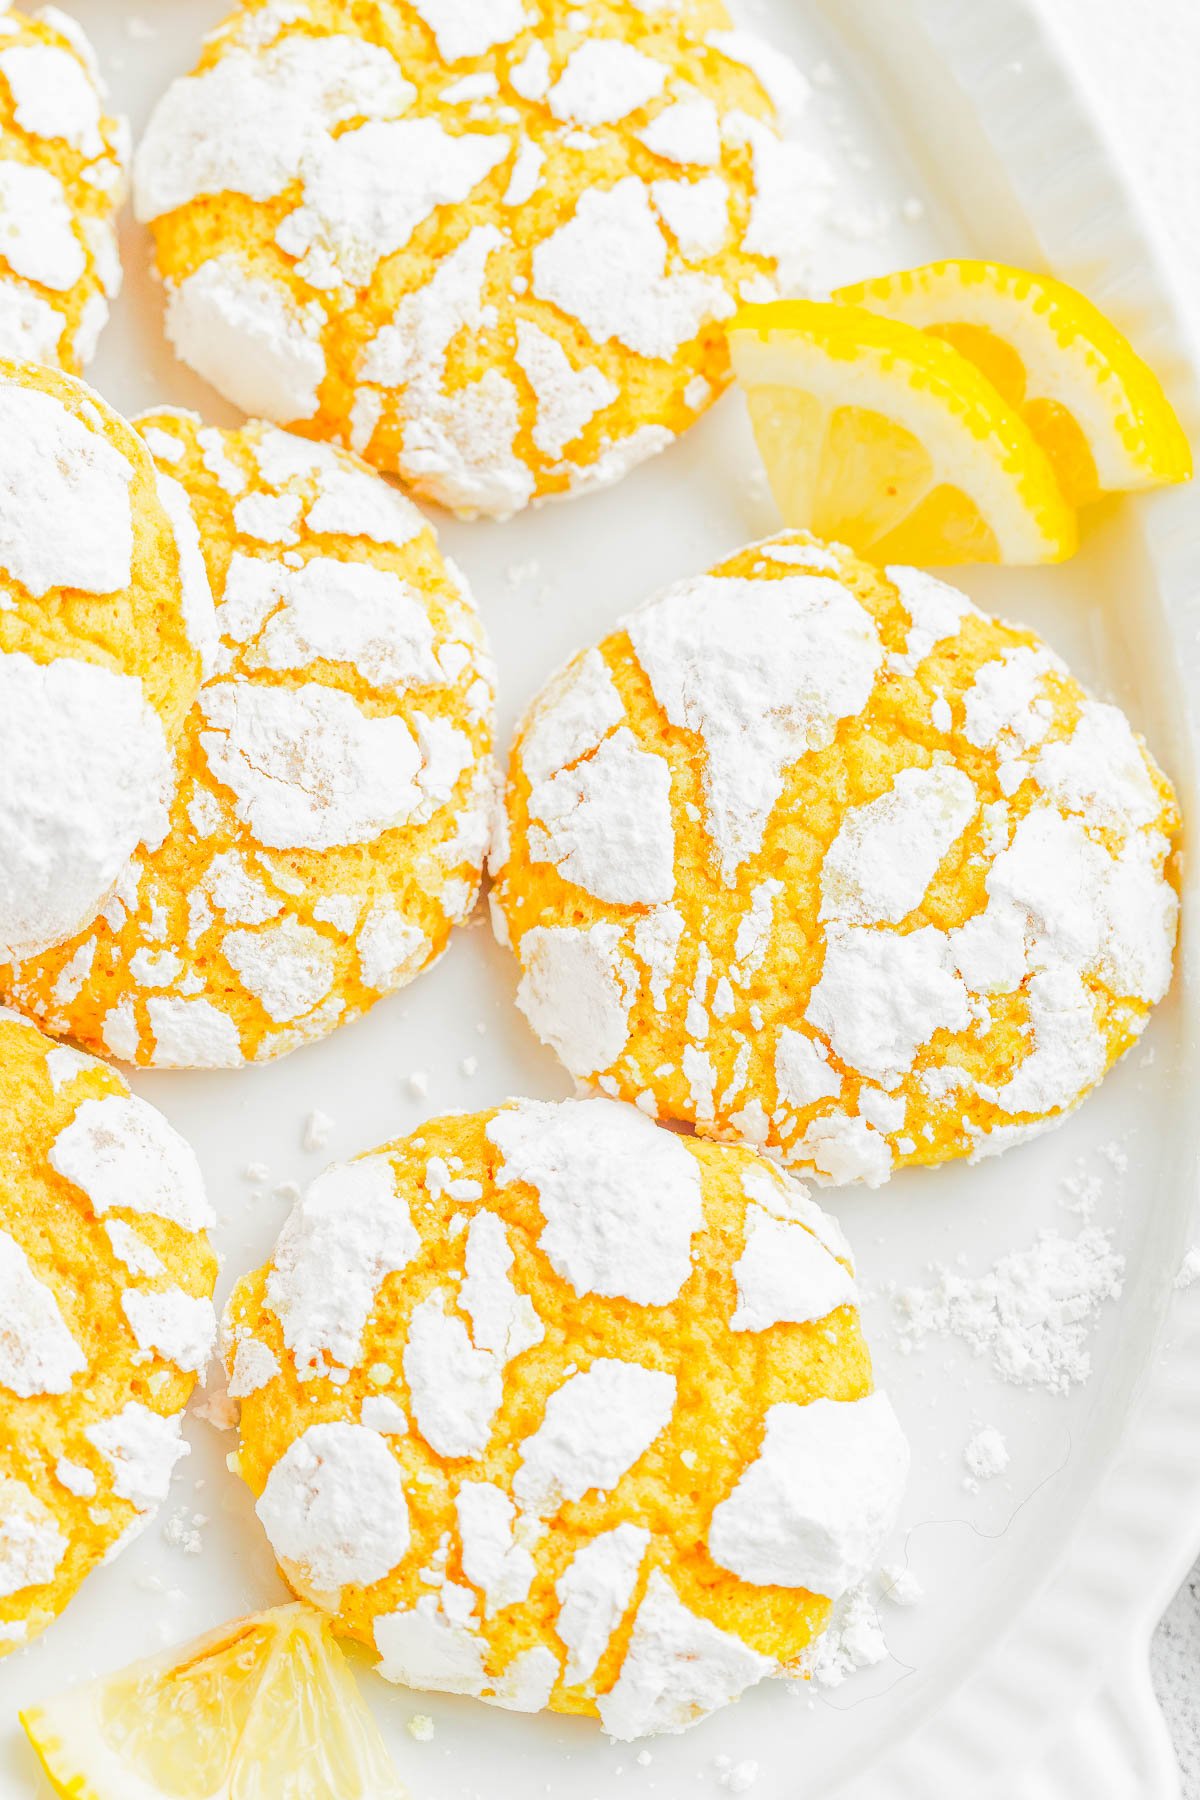 Lemon Crinkle Cookies — Lemon crinkles are pillowy soft on the inside and chewy on the outside, with slightly crispy edges from the powdered sugar coating! They taste like lemon bars, but in cookie form! The dough is flavored with lemon three ways and is perfect for holiday gatherings, Easter, Mother’s day, or whenever you’re craving an EASY lemon dessert 🍋!